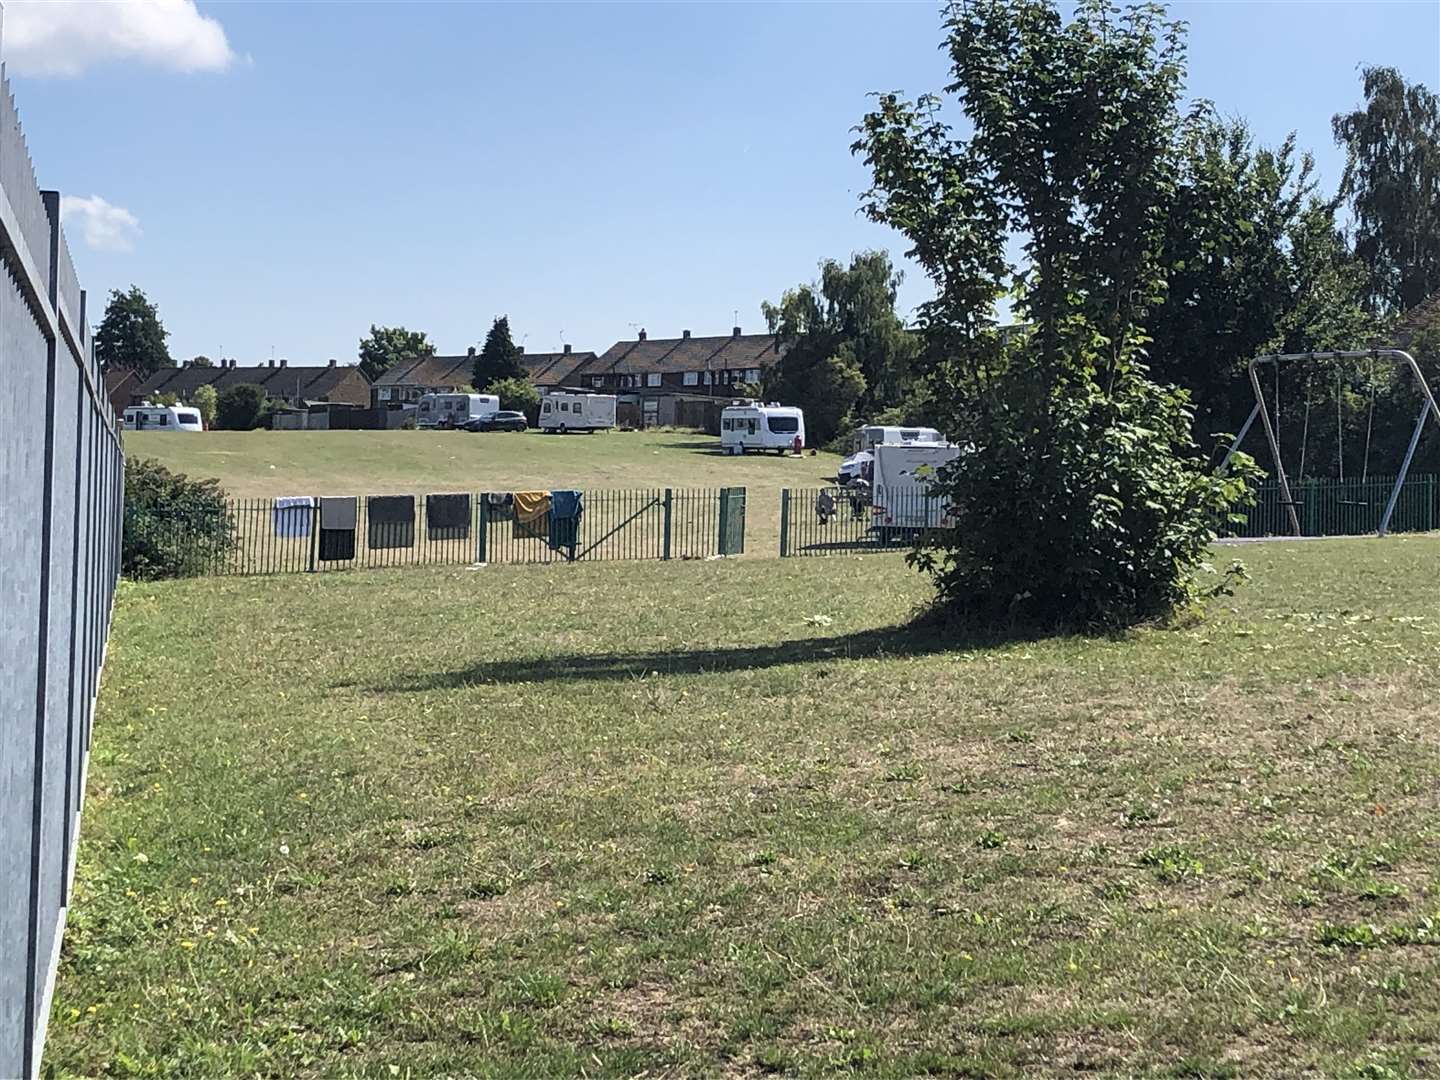 Travellers were pitched up in St Gregory's Crescent, Gravesend